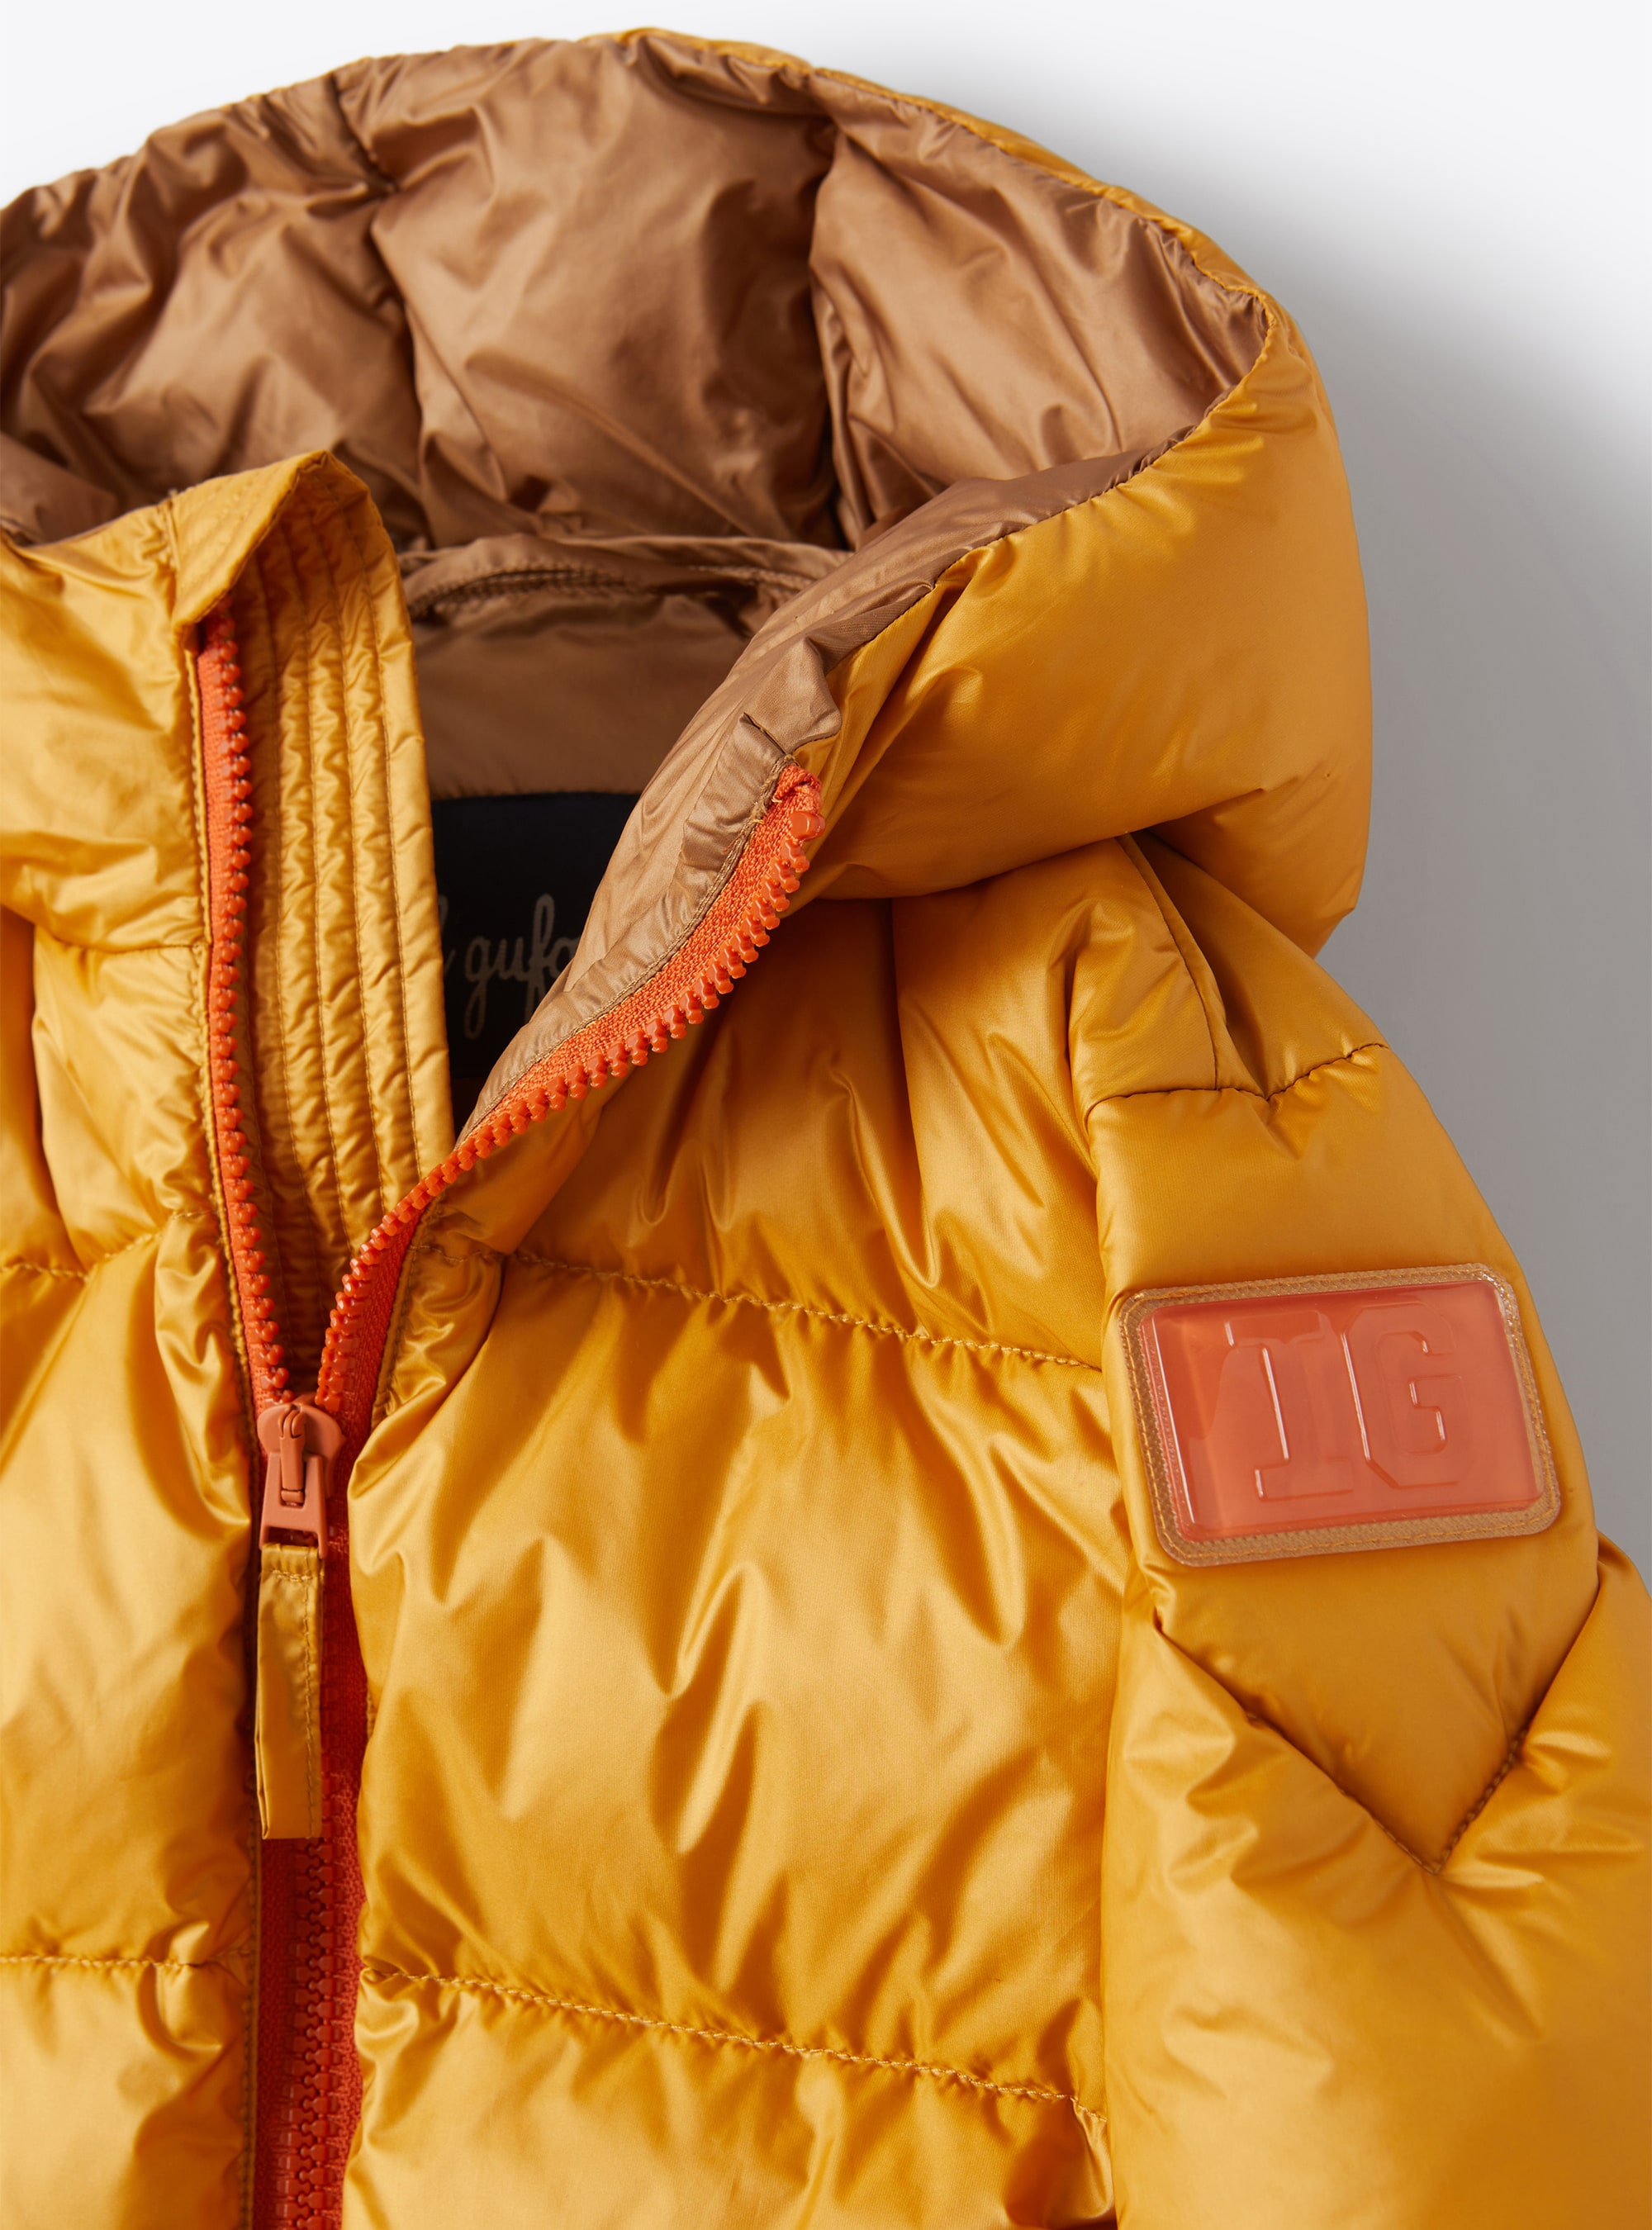 Yellow down jacket with contrast details - Yellow | Il Gufo